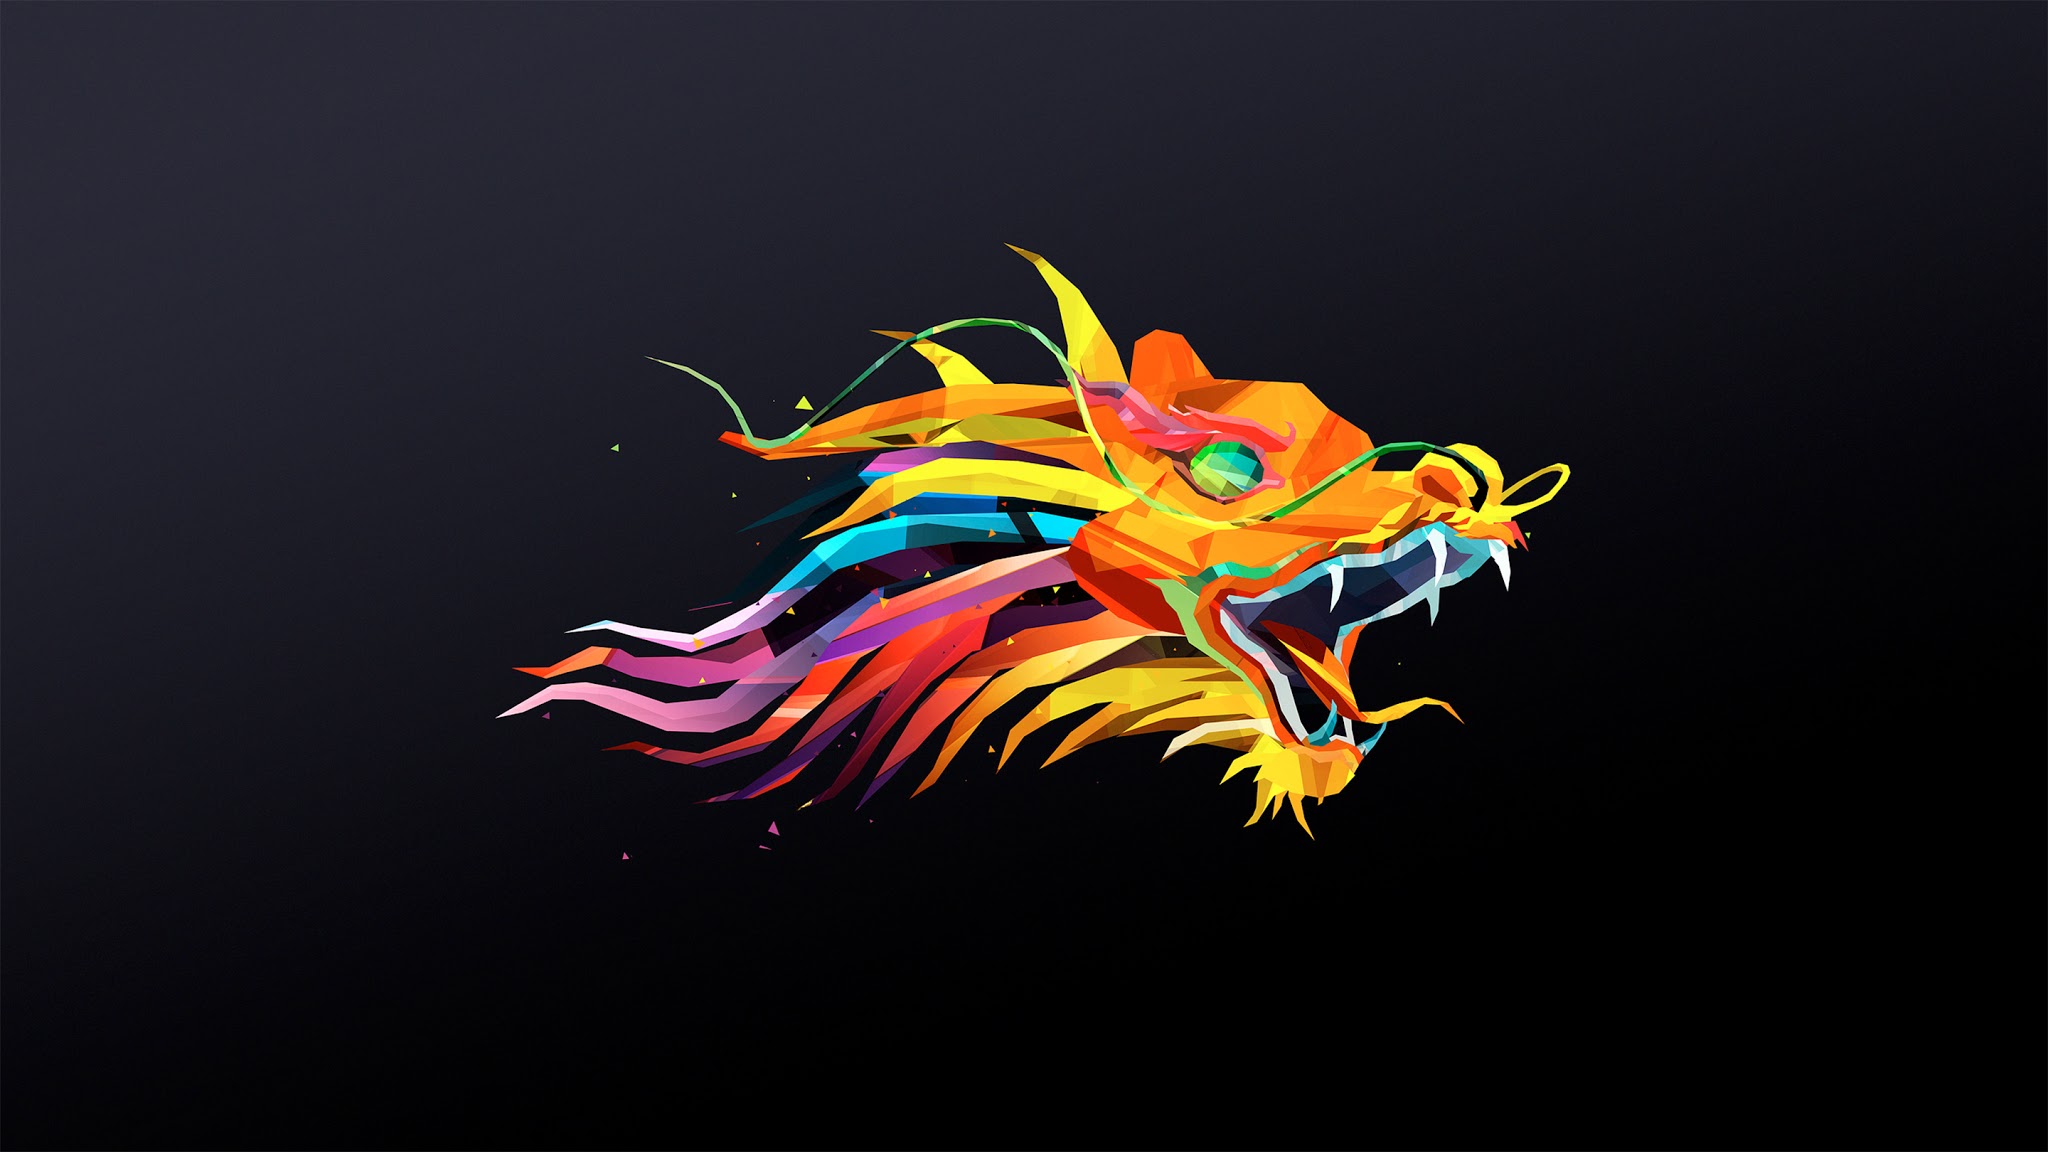 Wallpaper Dna Colorful Dragon By Justin Maller